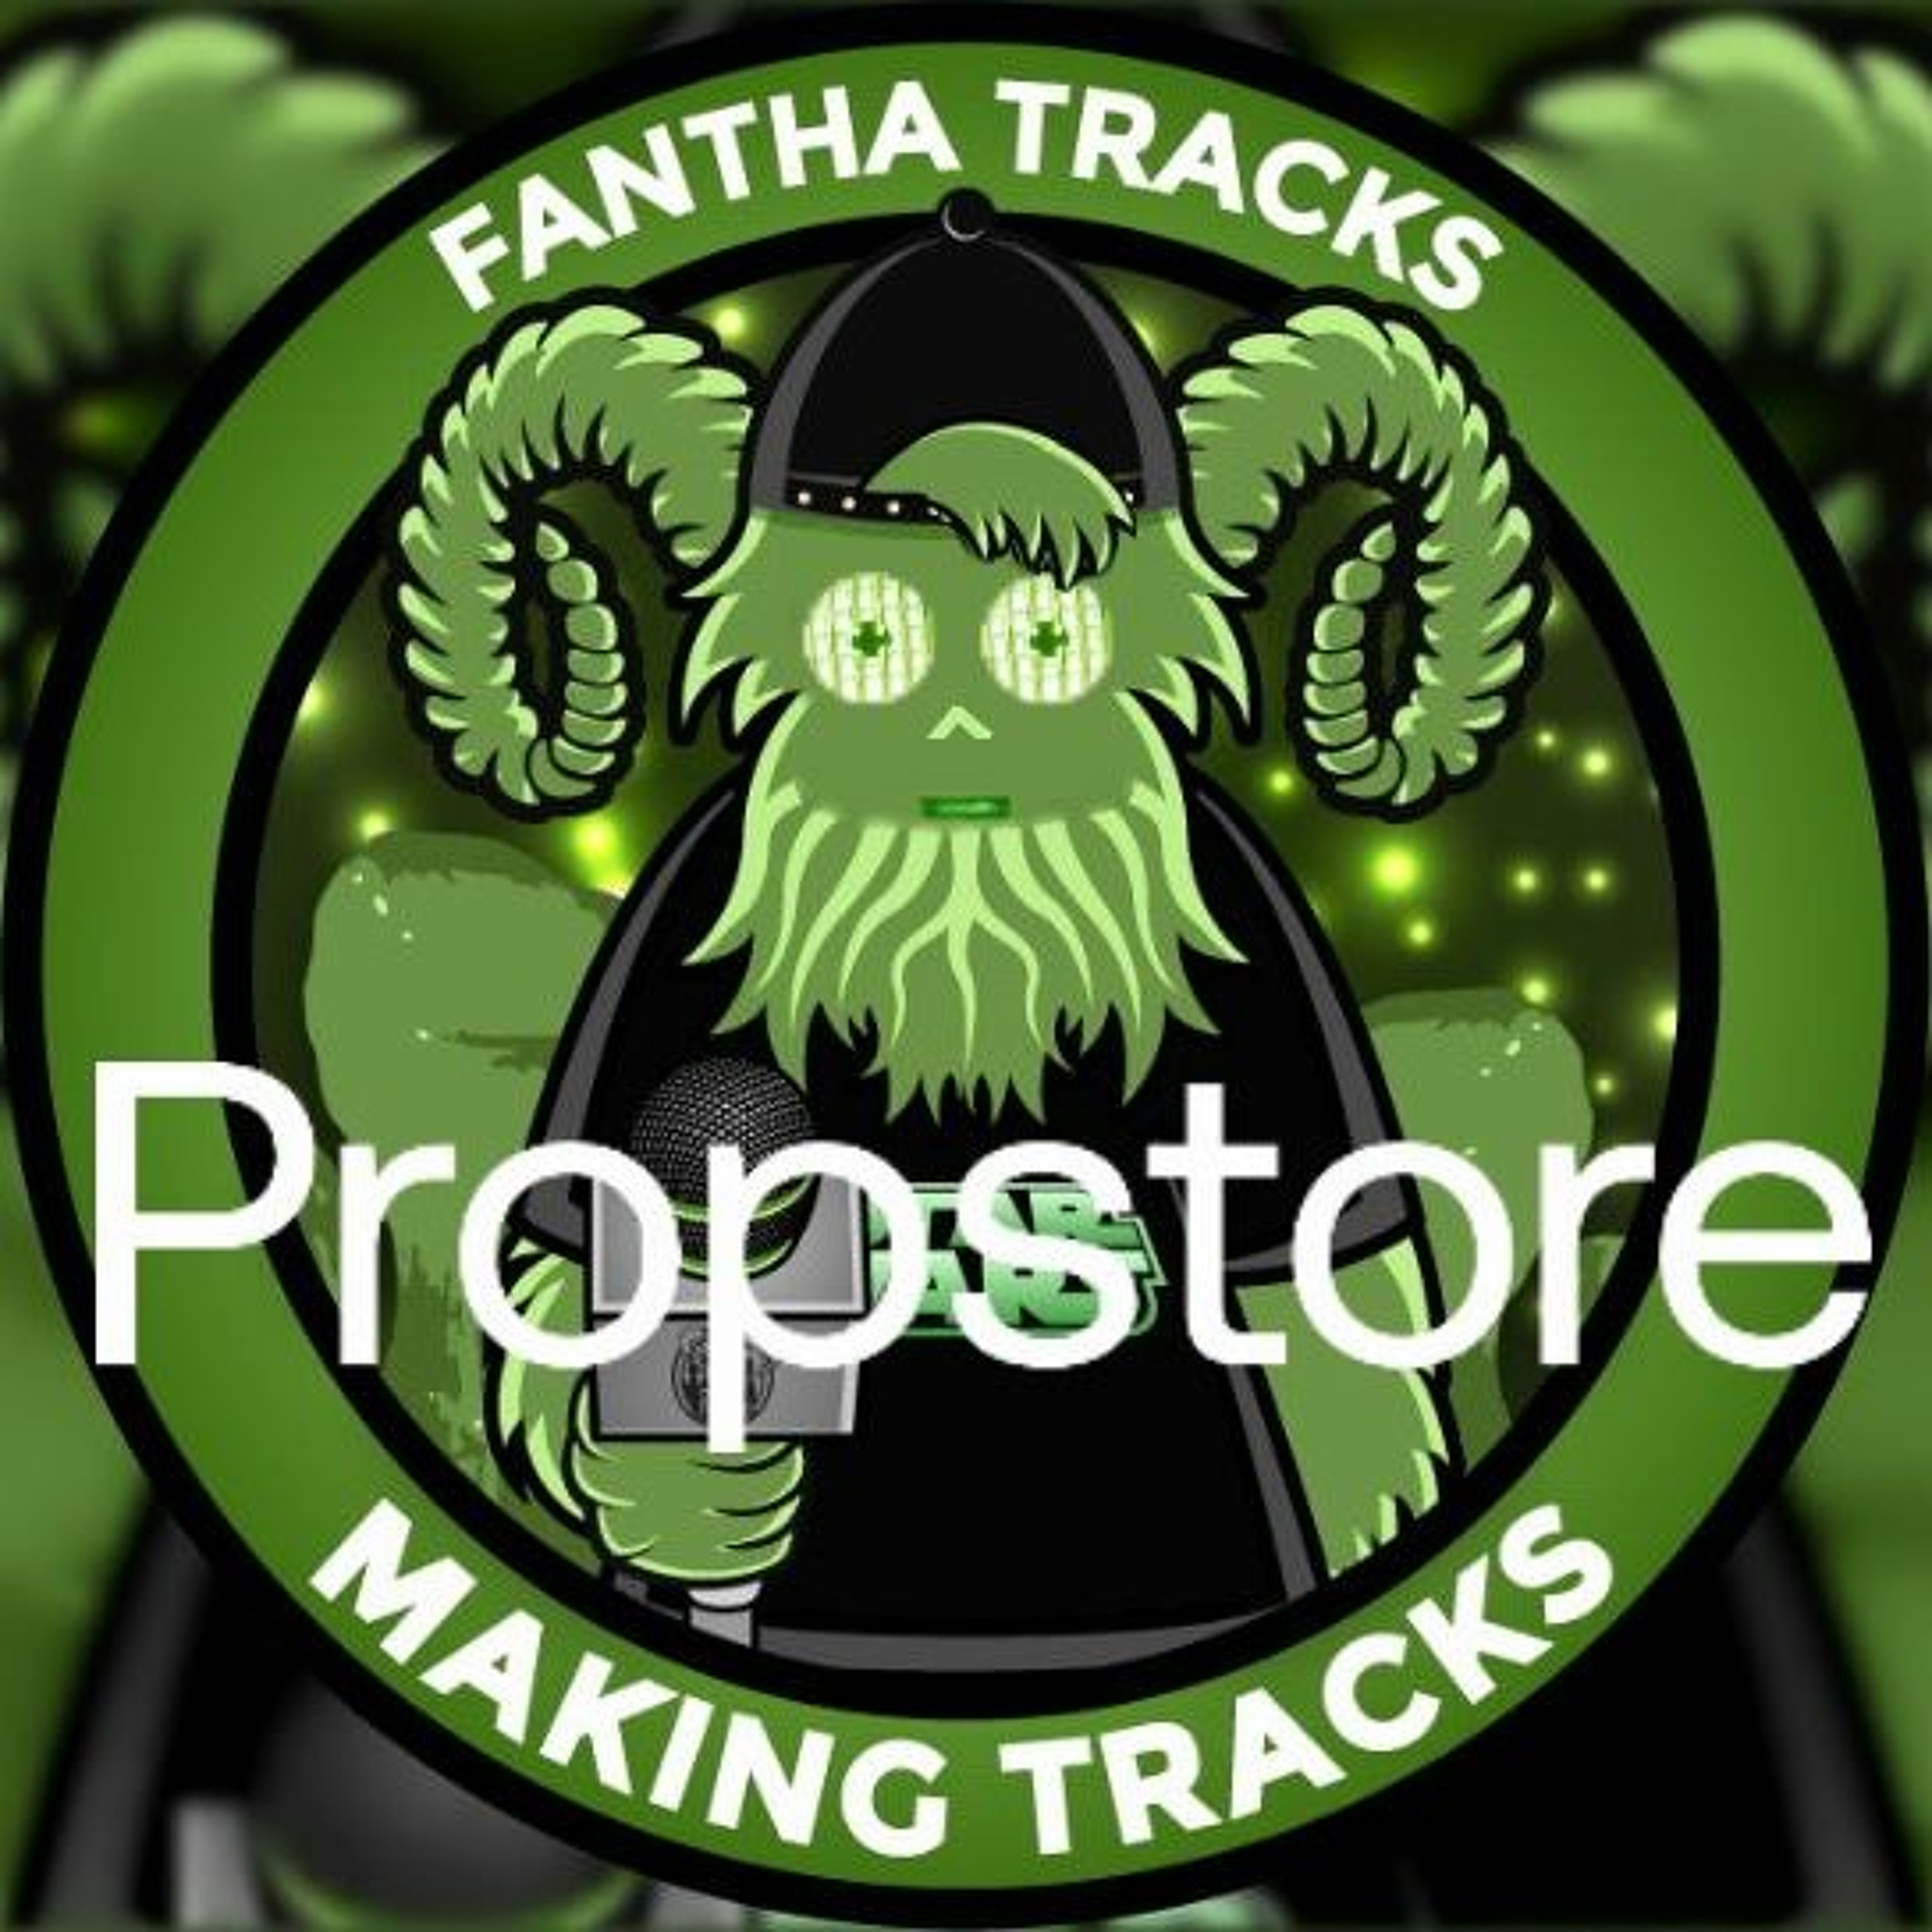 Making Tracks: Propstore: The Anthony Daniels Collection - With guest Anthony Daniels